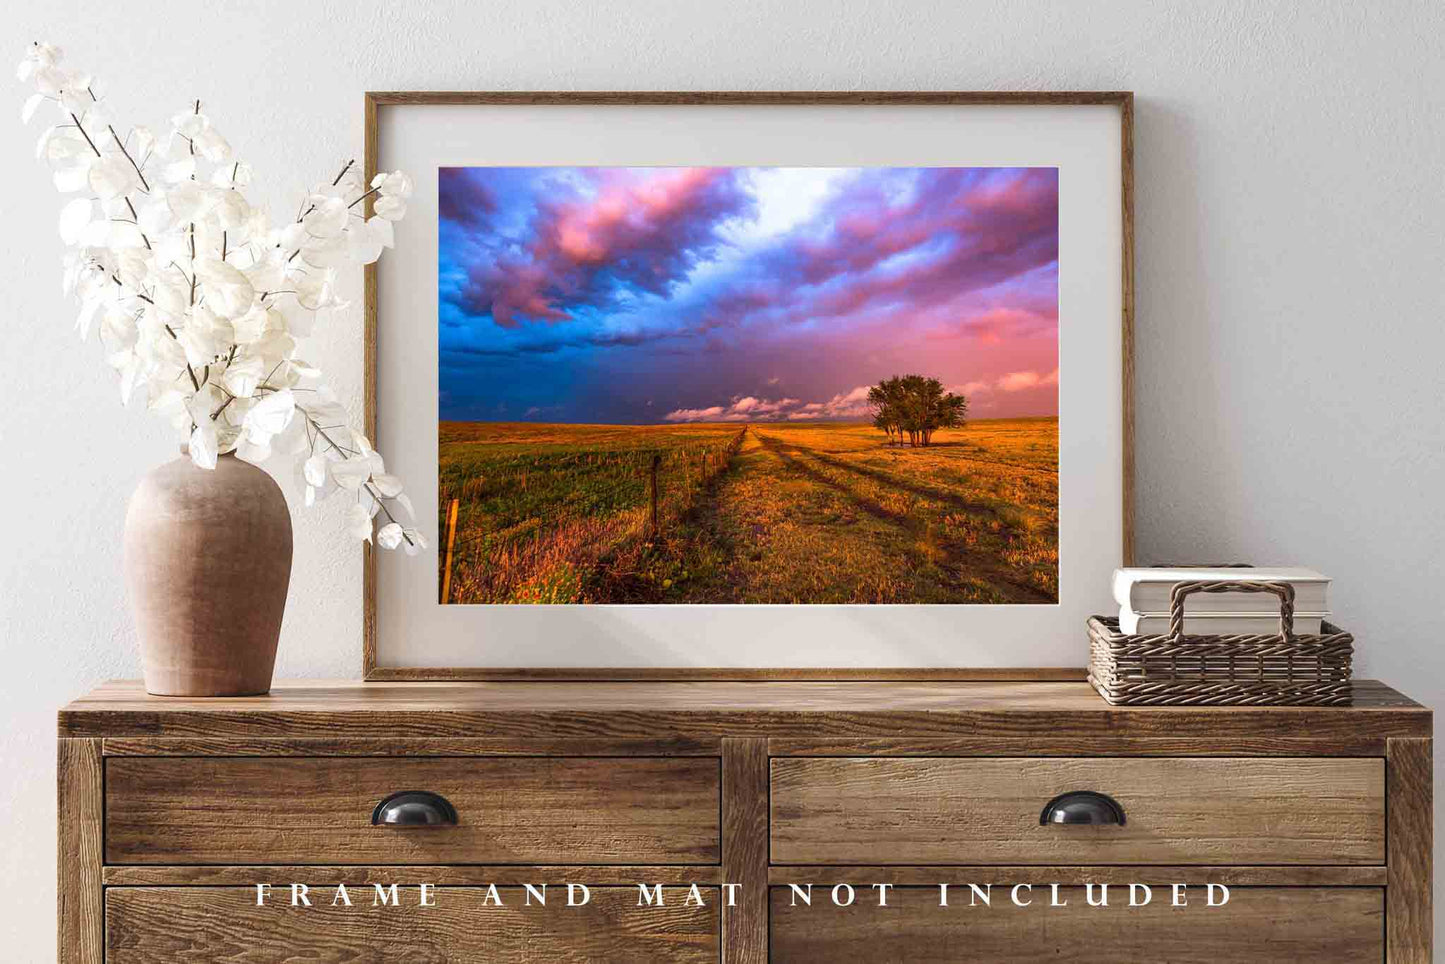 Prairie Wall Art - Picture of Trees and Fence Under Stormy Sky in Oklahoma - Western Photography Great Plains Photo Print Artwork Decor